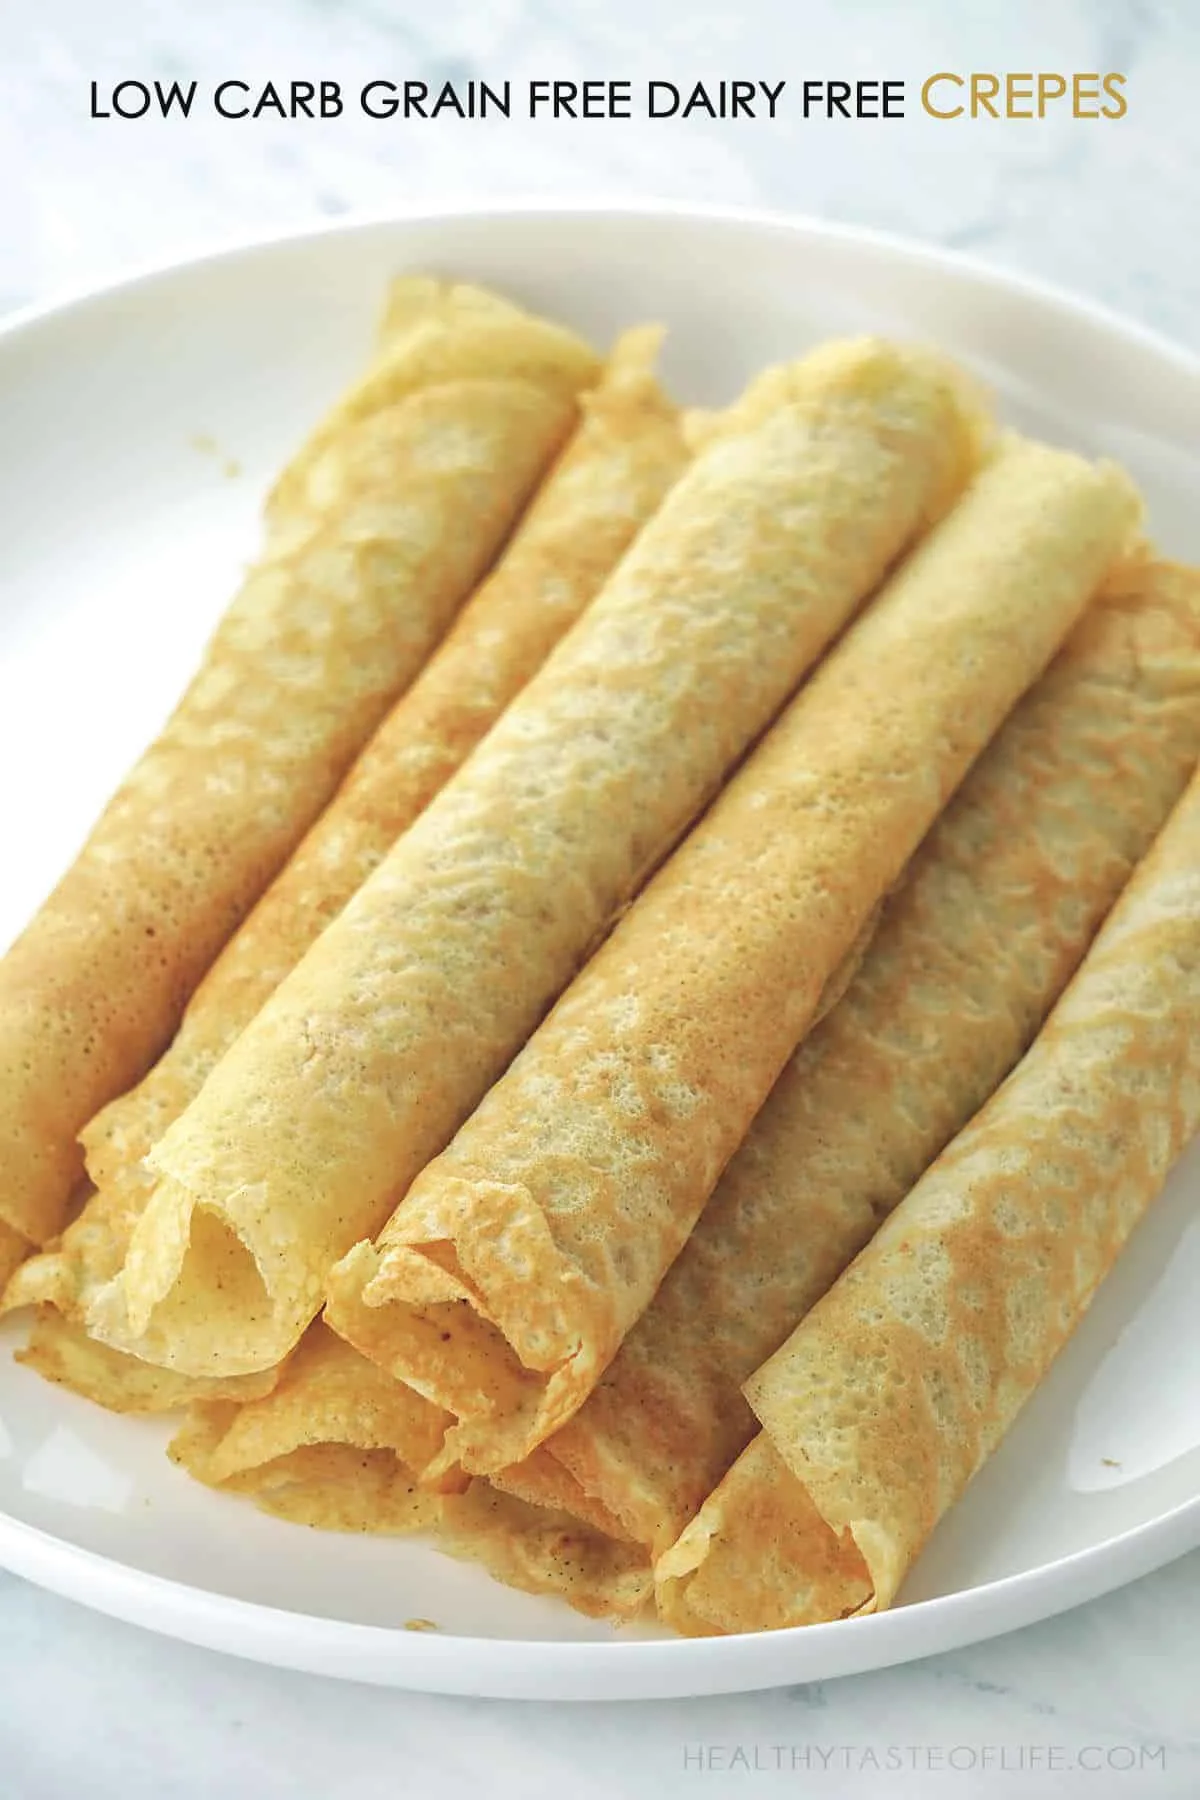 Keto Low carb grain free crepes with almond flour and banana flour, also dairy free gluten free and paleo friendly.